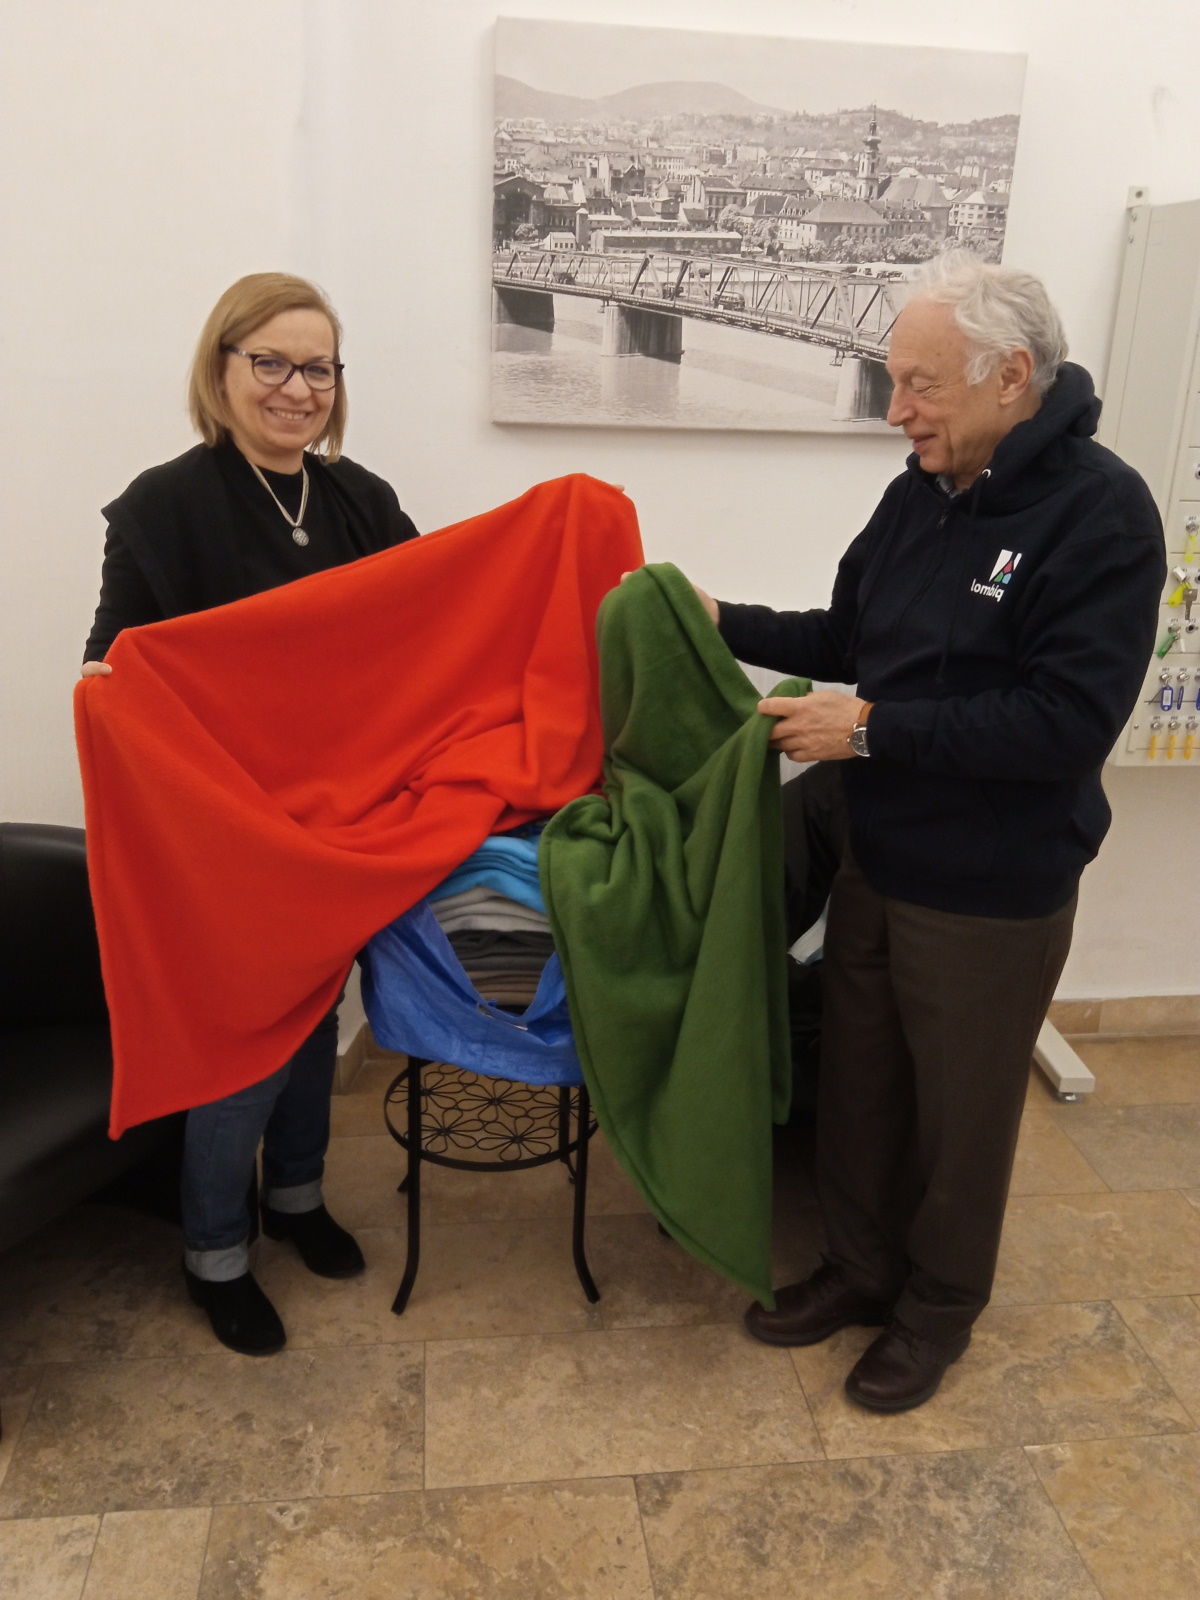 The blankets donated by Lombiq to the Hungarian Charity Service of the Order of Malta to help Ukrainian refugees